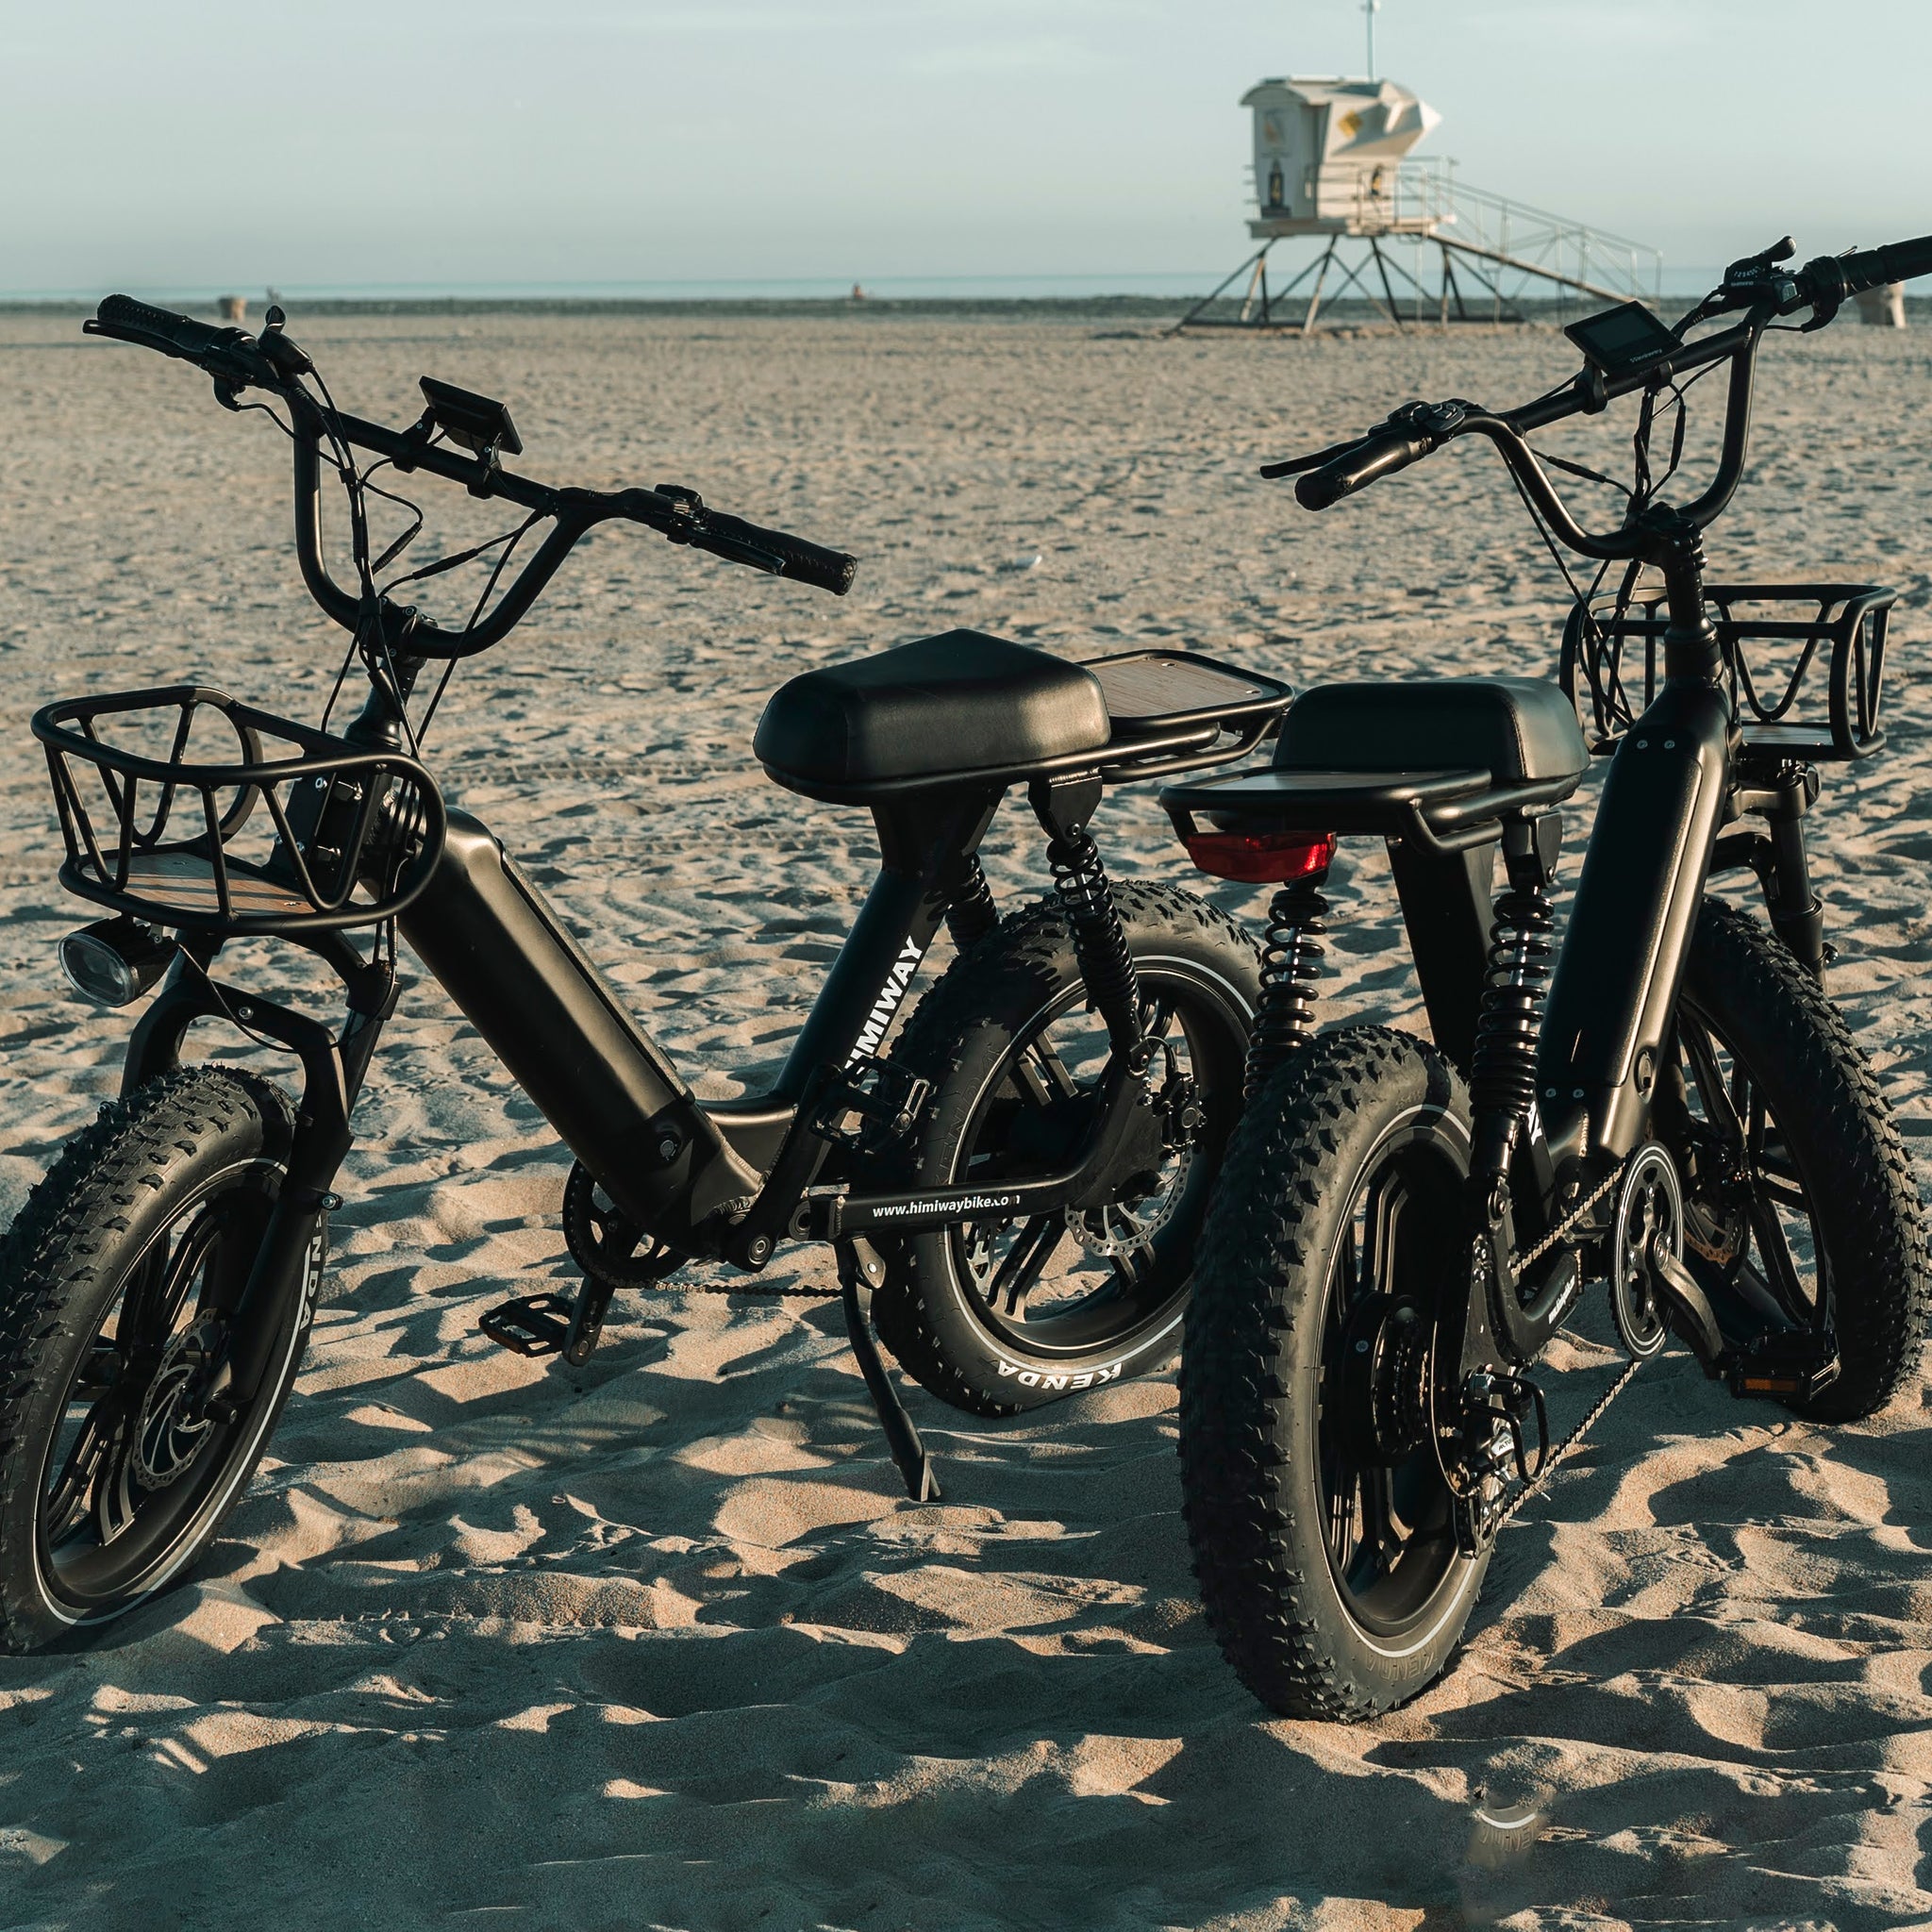 5 Tips for Riding E-Bikes on the Beach in the Summer